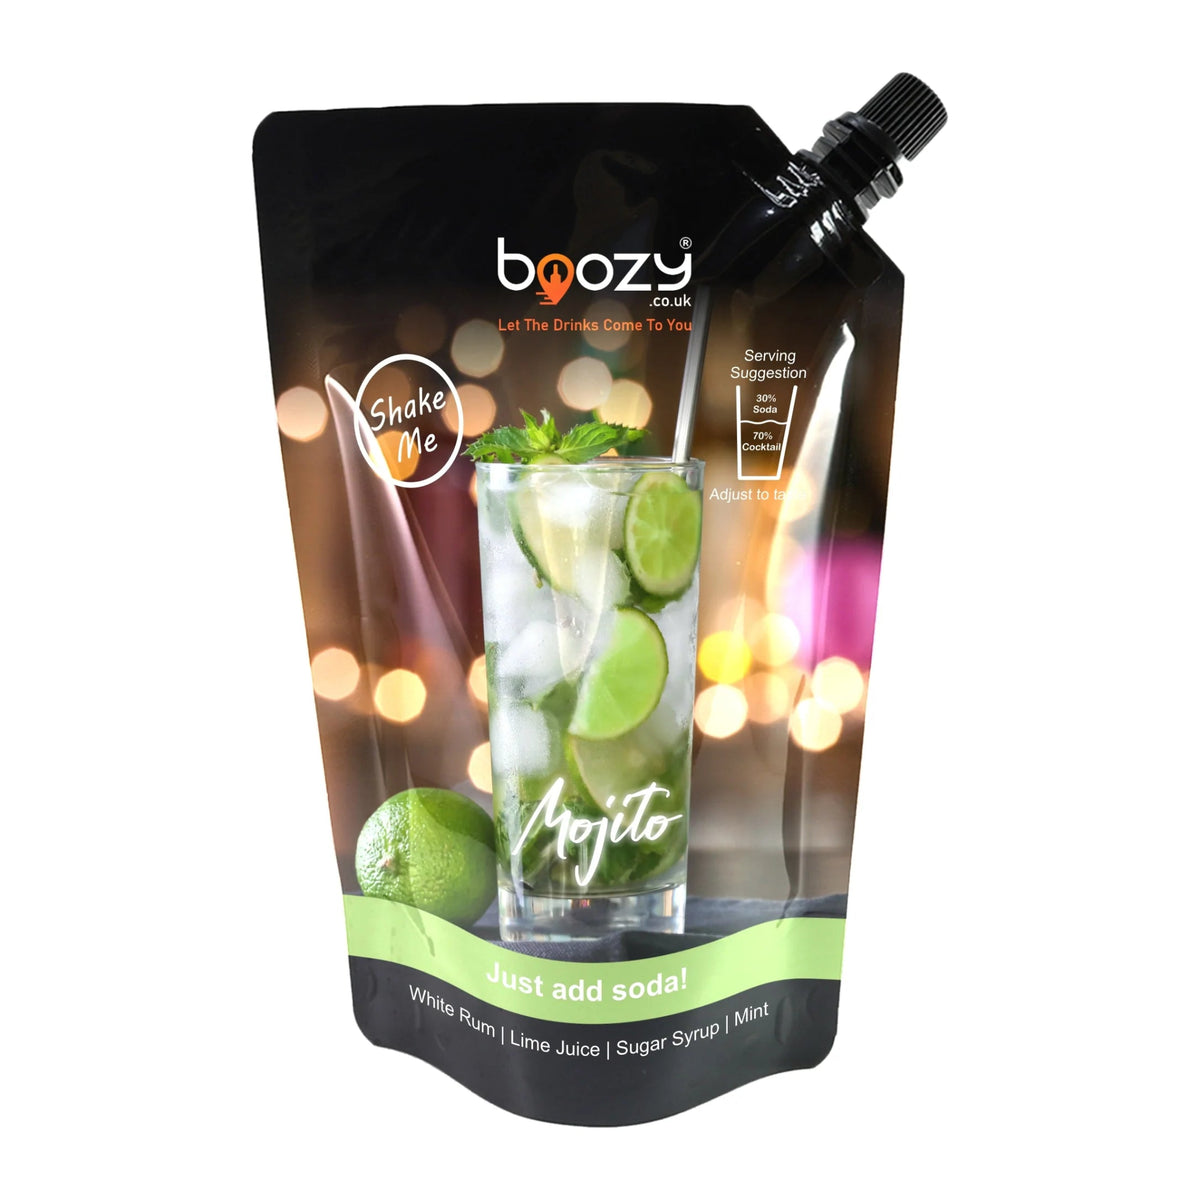 Boozy Mojito Cocktail, 20% ABV, 500ml, 7-8 Servings, Just Add Soda, Premium Ready Mixed Cocktail - Boozy